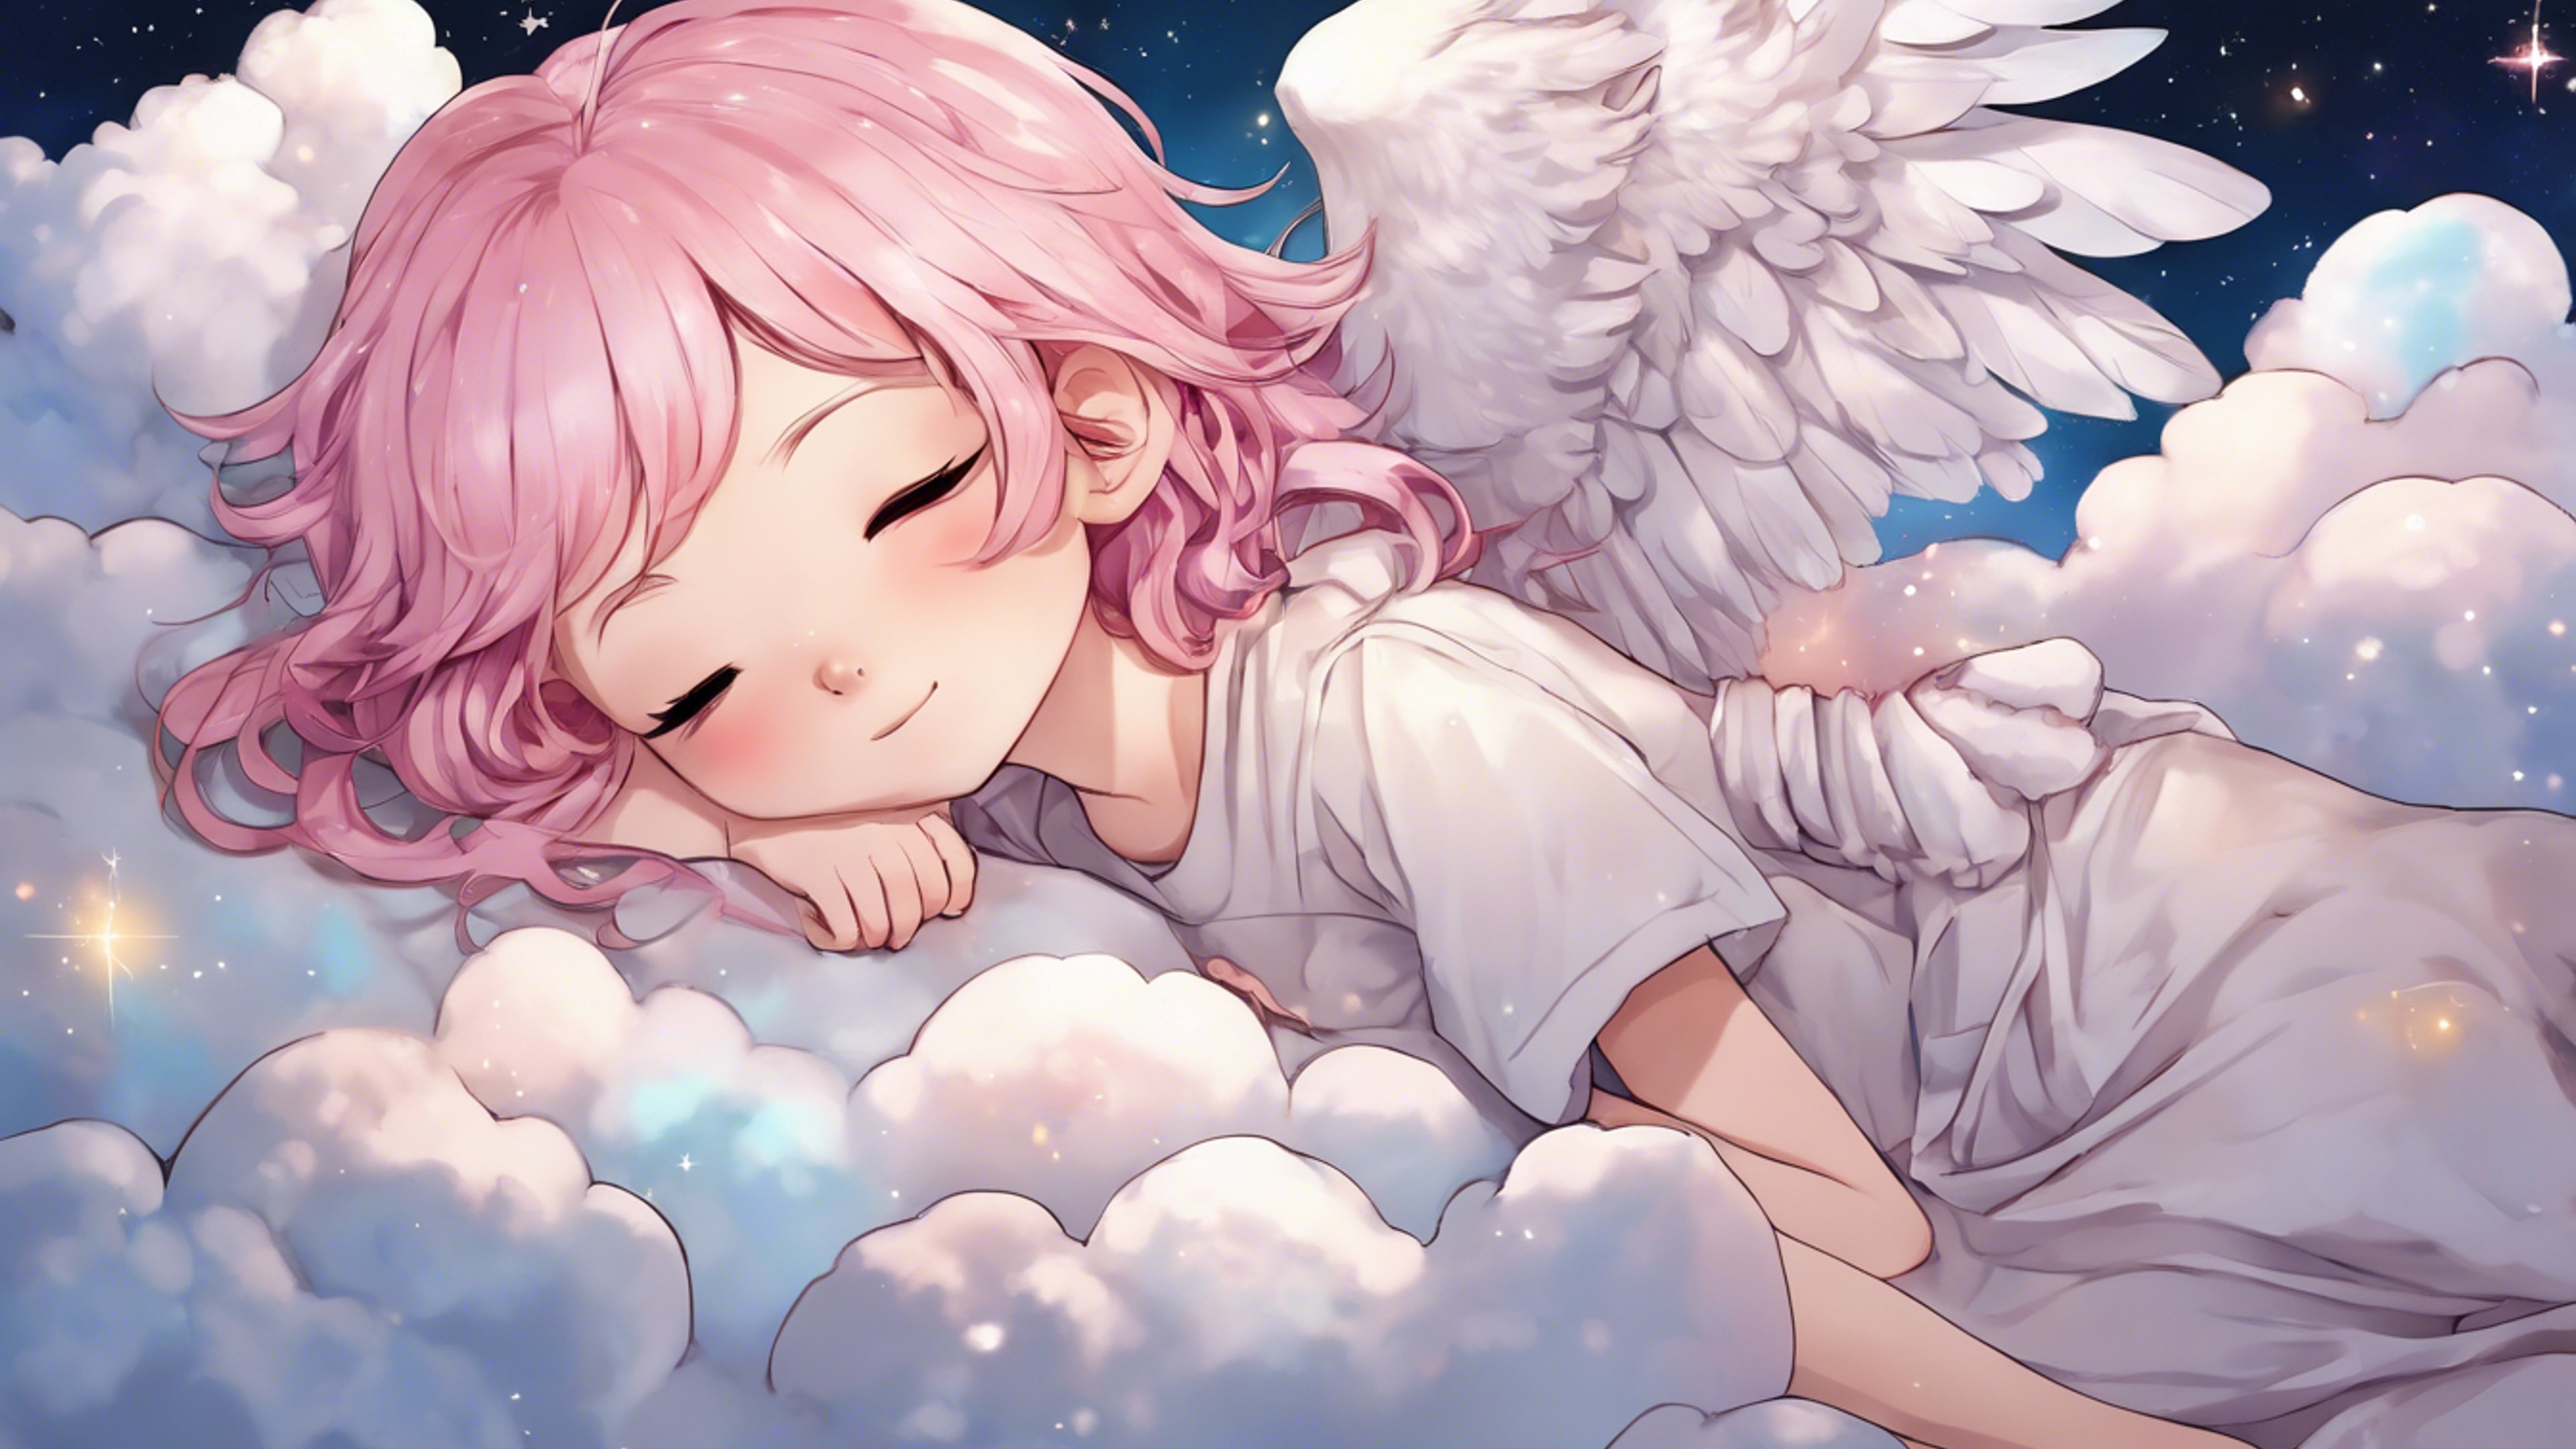 A chibi-style anime girl with pastel pink hair and angel wings, sleeping peacefully on a fluffy cloud under a starry night sky. Tapeta[4a6f35b80bd74bd2872d]